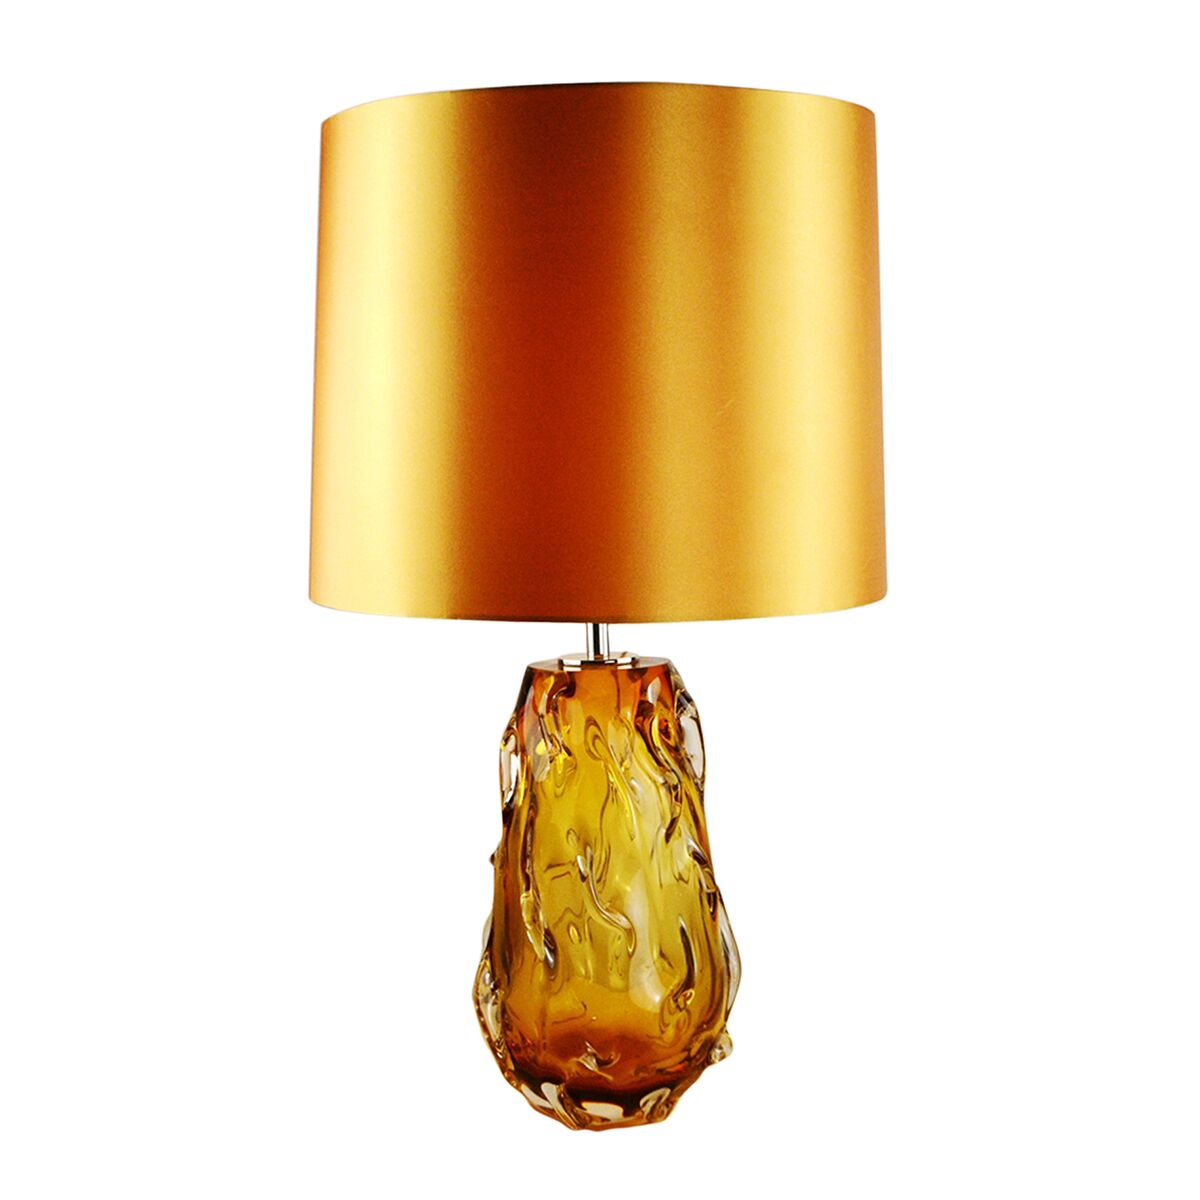 Tlg3024 Valencia Orange Retro Inpsired Accent Table Lamp In Solid Glass With French Wire